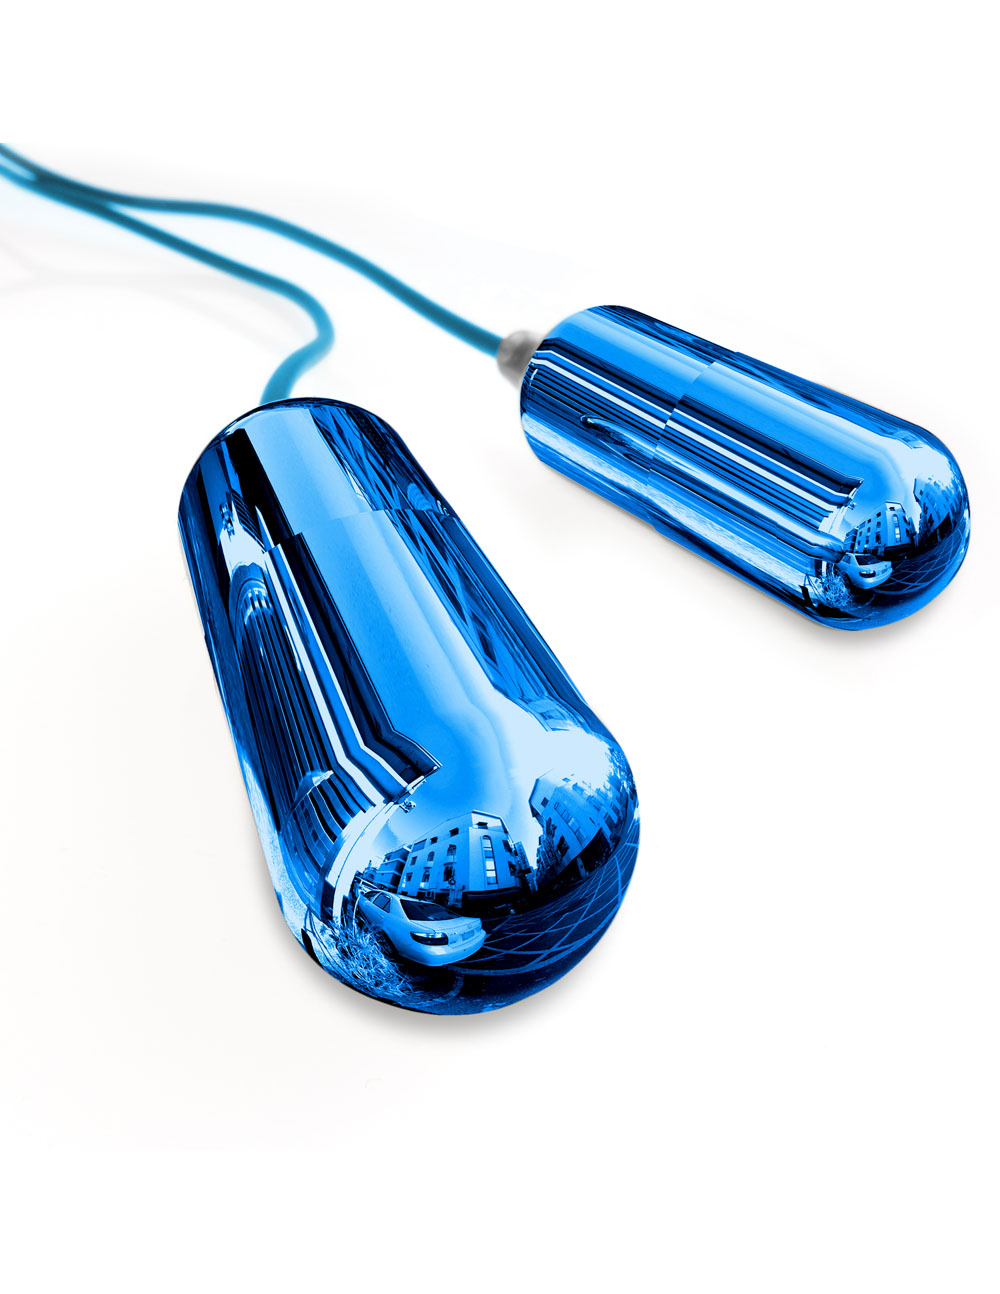 Dual Vibrating Penis Sleeve - Blue and Clear